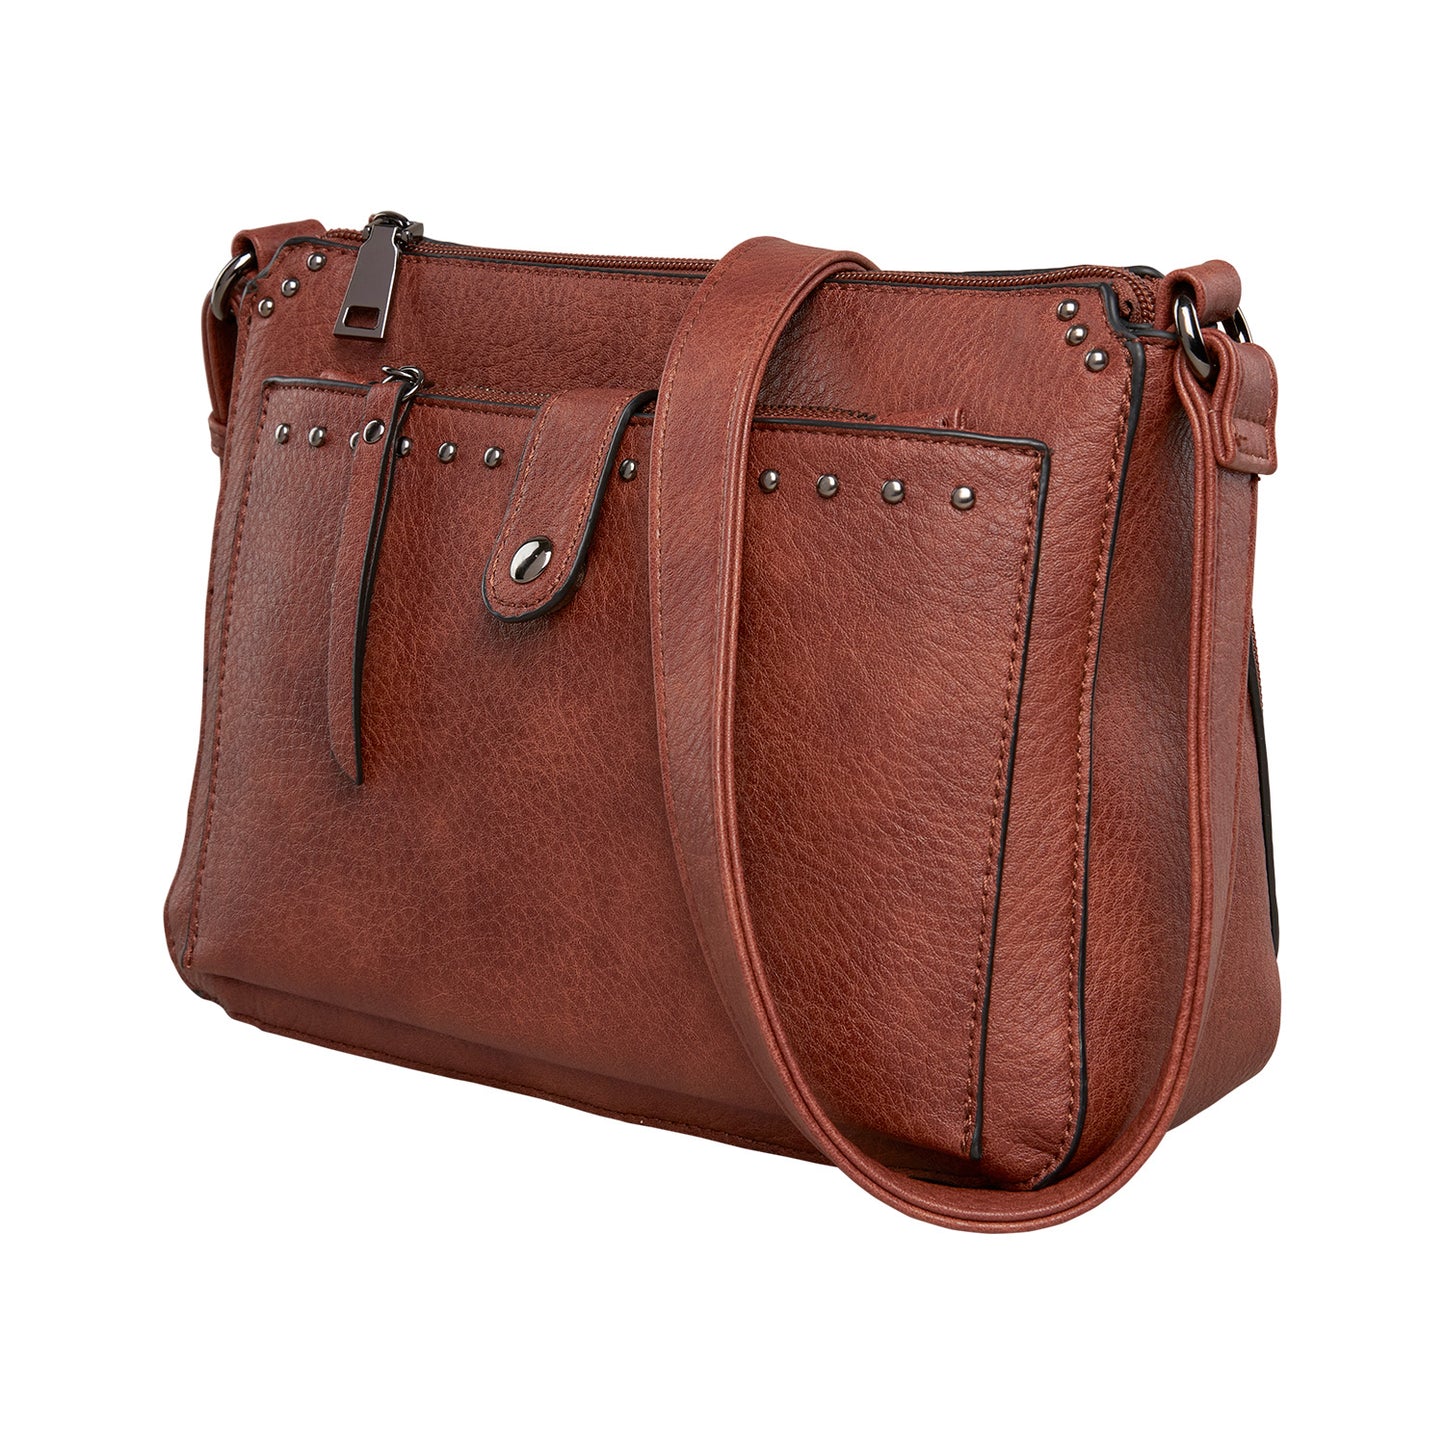 CONCEALED CARRY RILEY TOTE